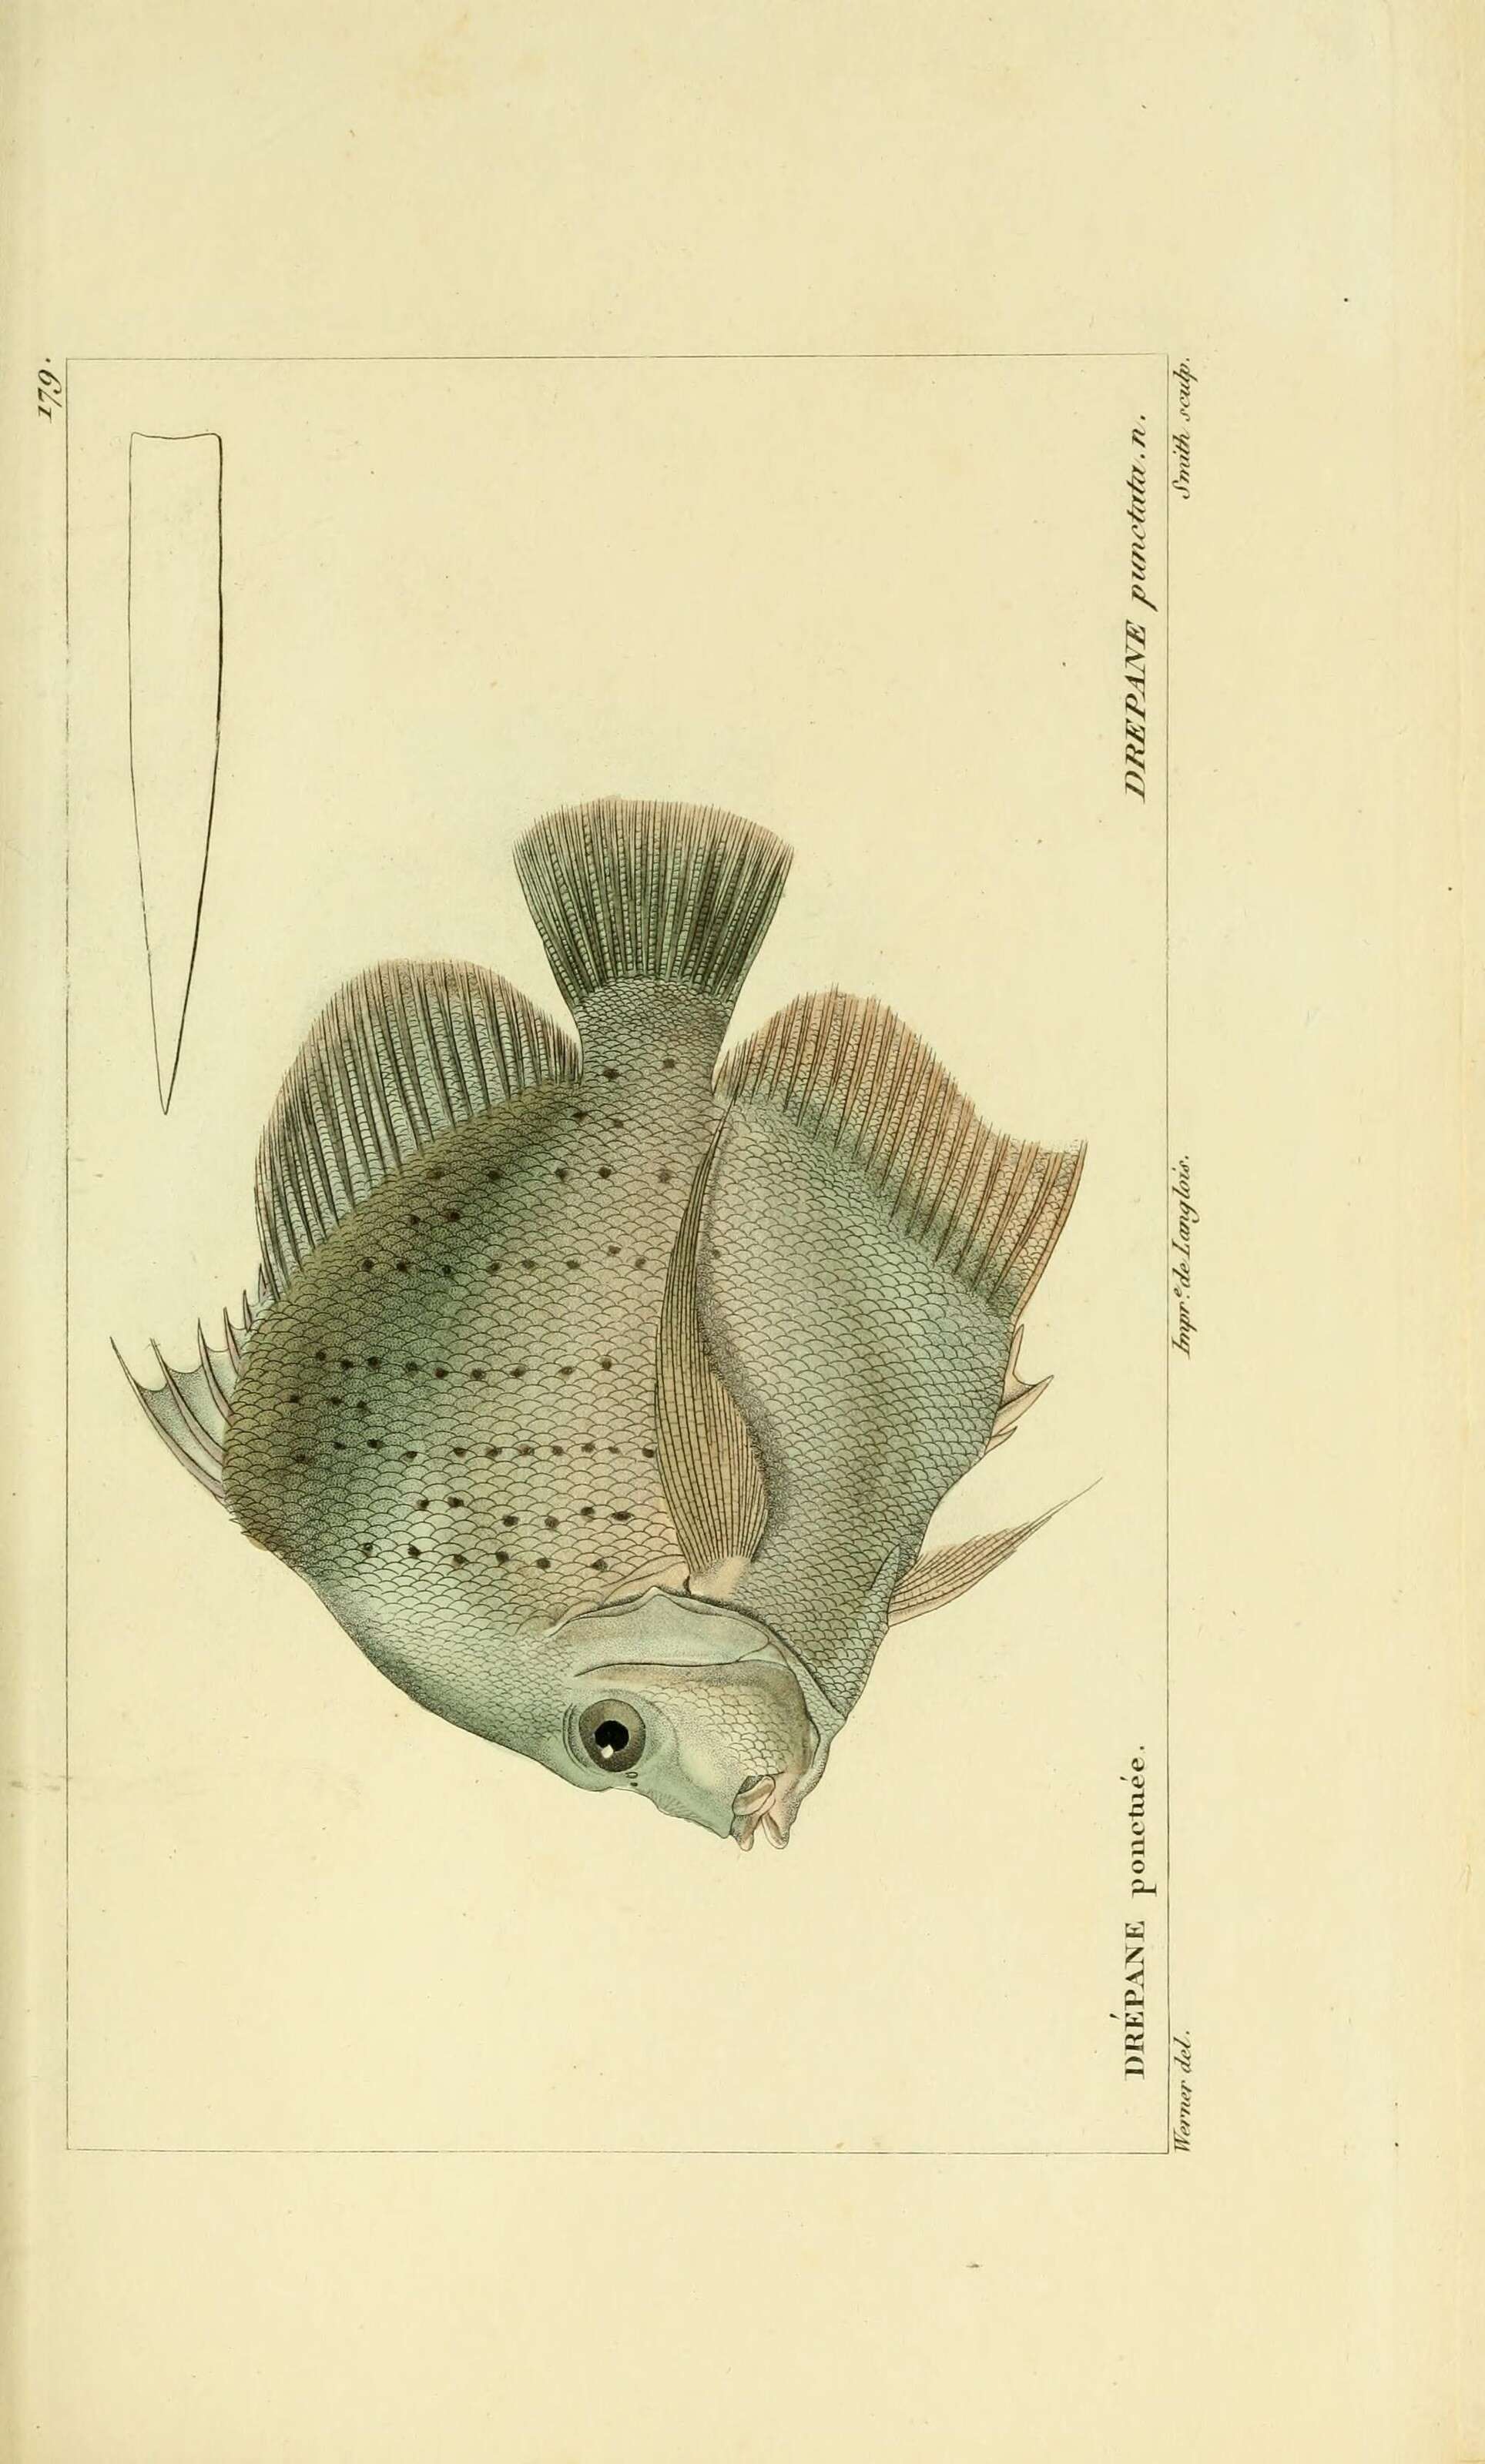 Image of sicklefishes